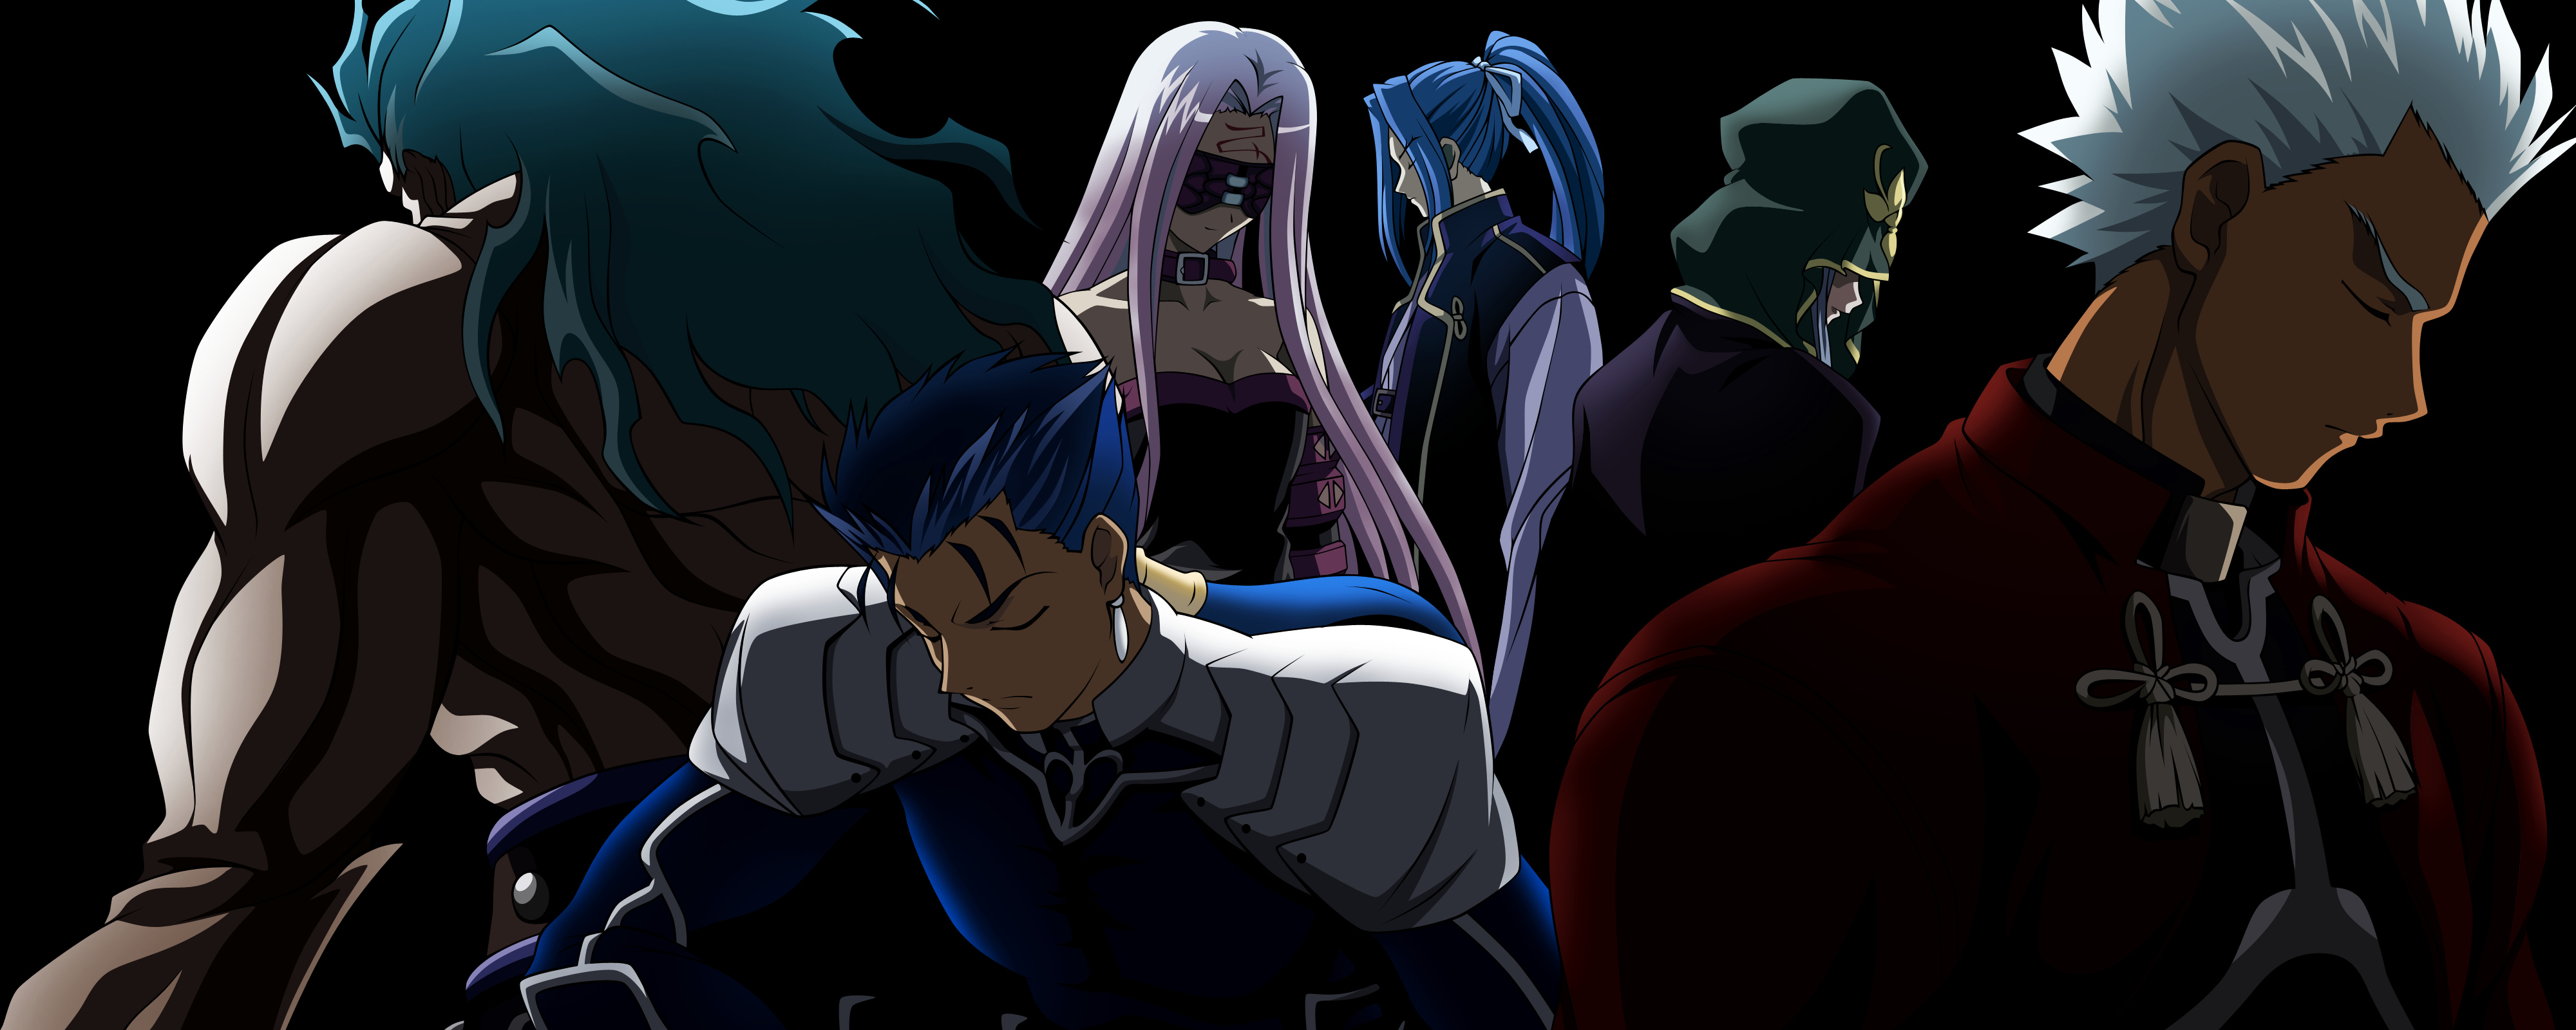 Caster And Lancer Fate Stay Night - HD Wallpaper 